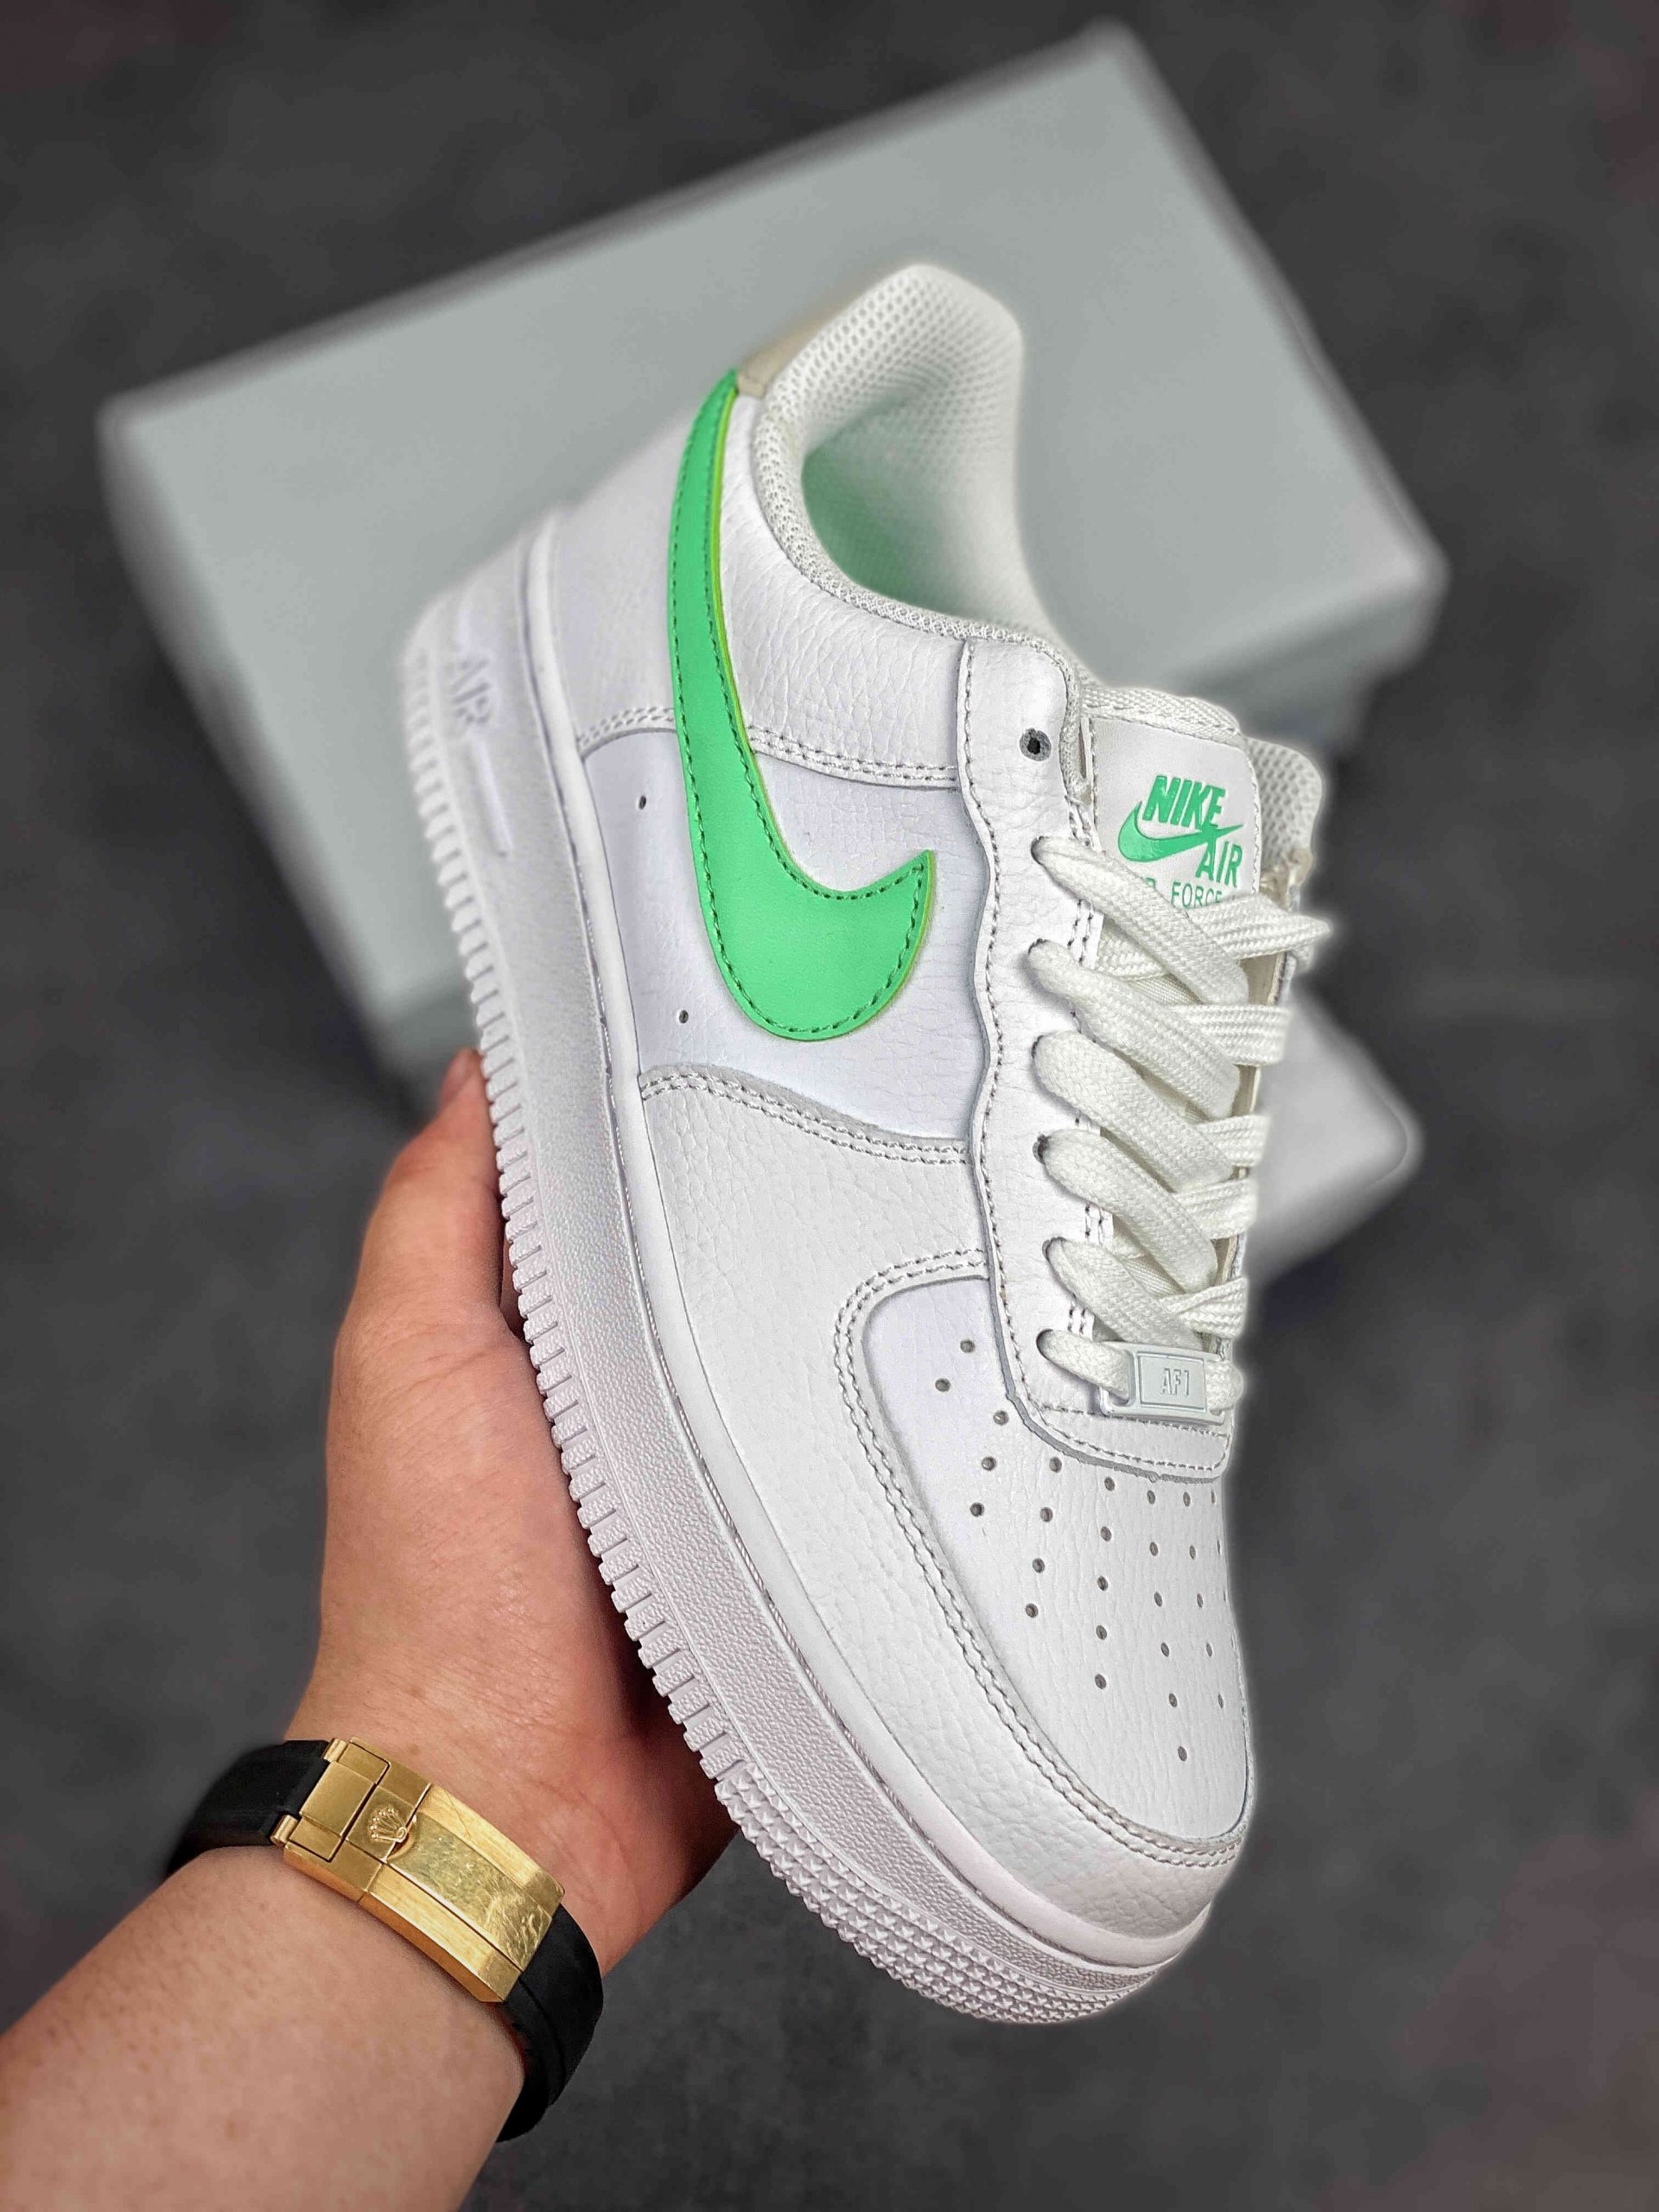 nike air force 1 light up shoes